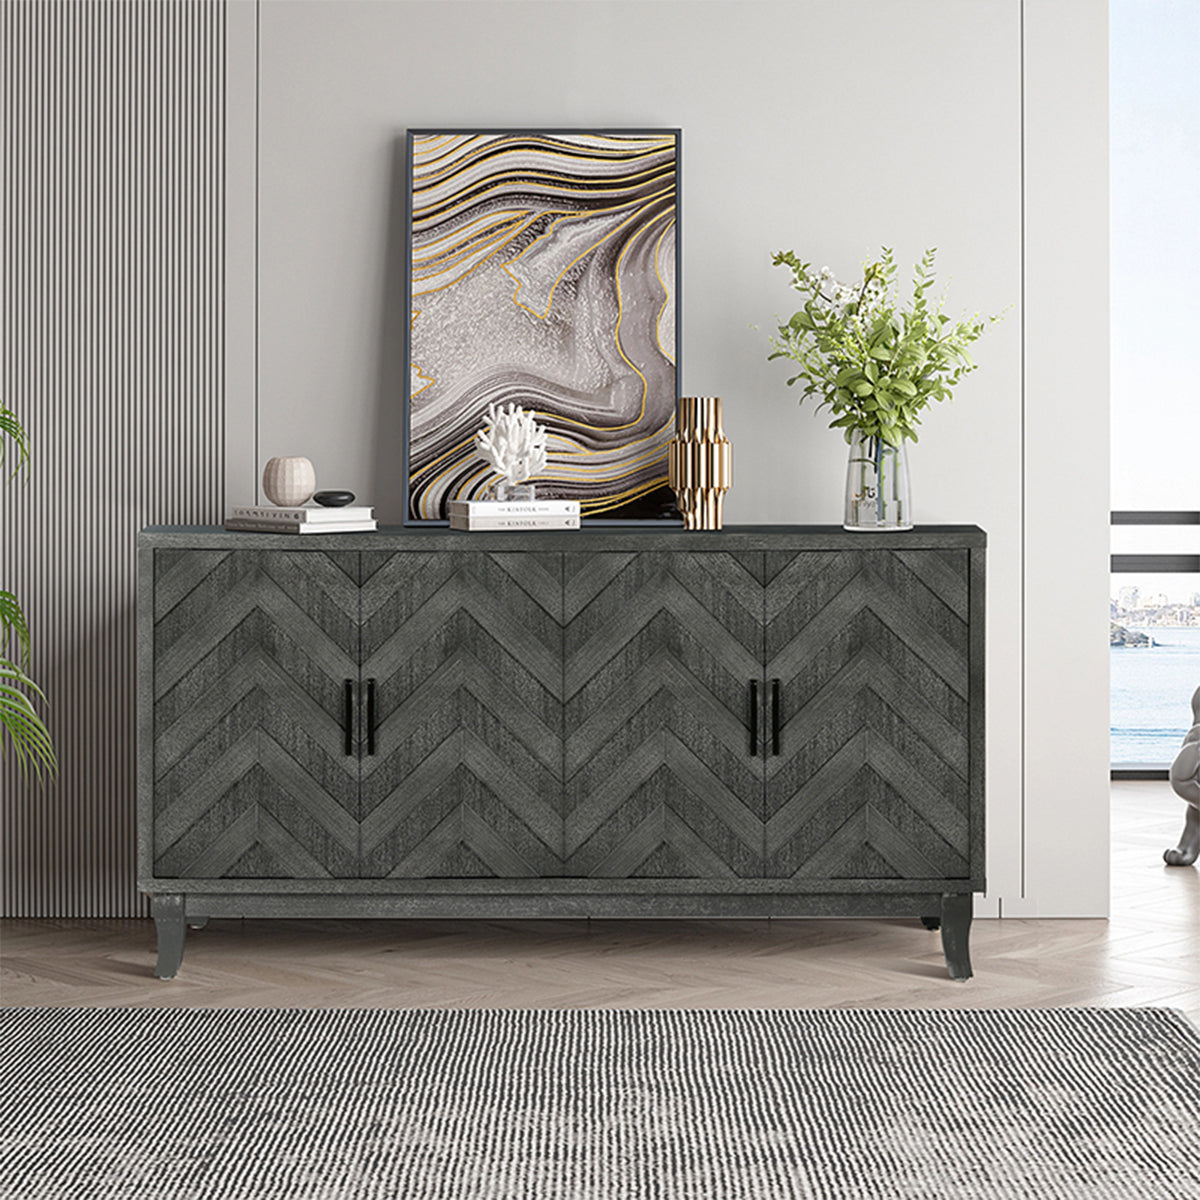 Stronger Vintage Style Buffet Cabinet, Lacquered Accent Storage 4 Door Wooden Cabinets,Thickened Sideboard Storage Cabinet - Taupe Grey